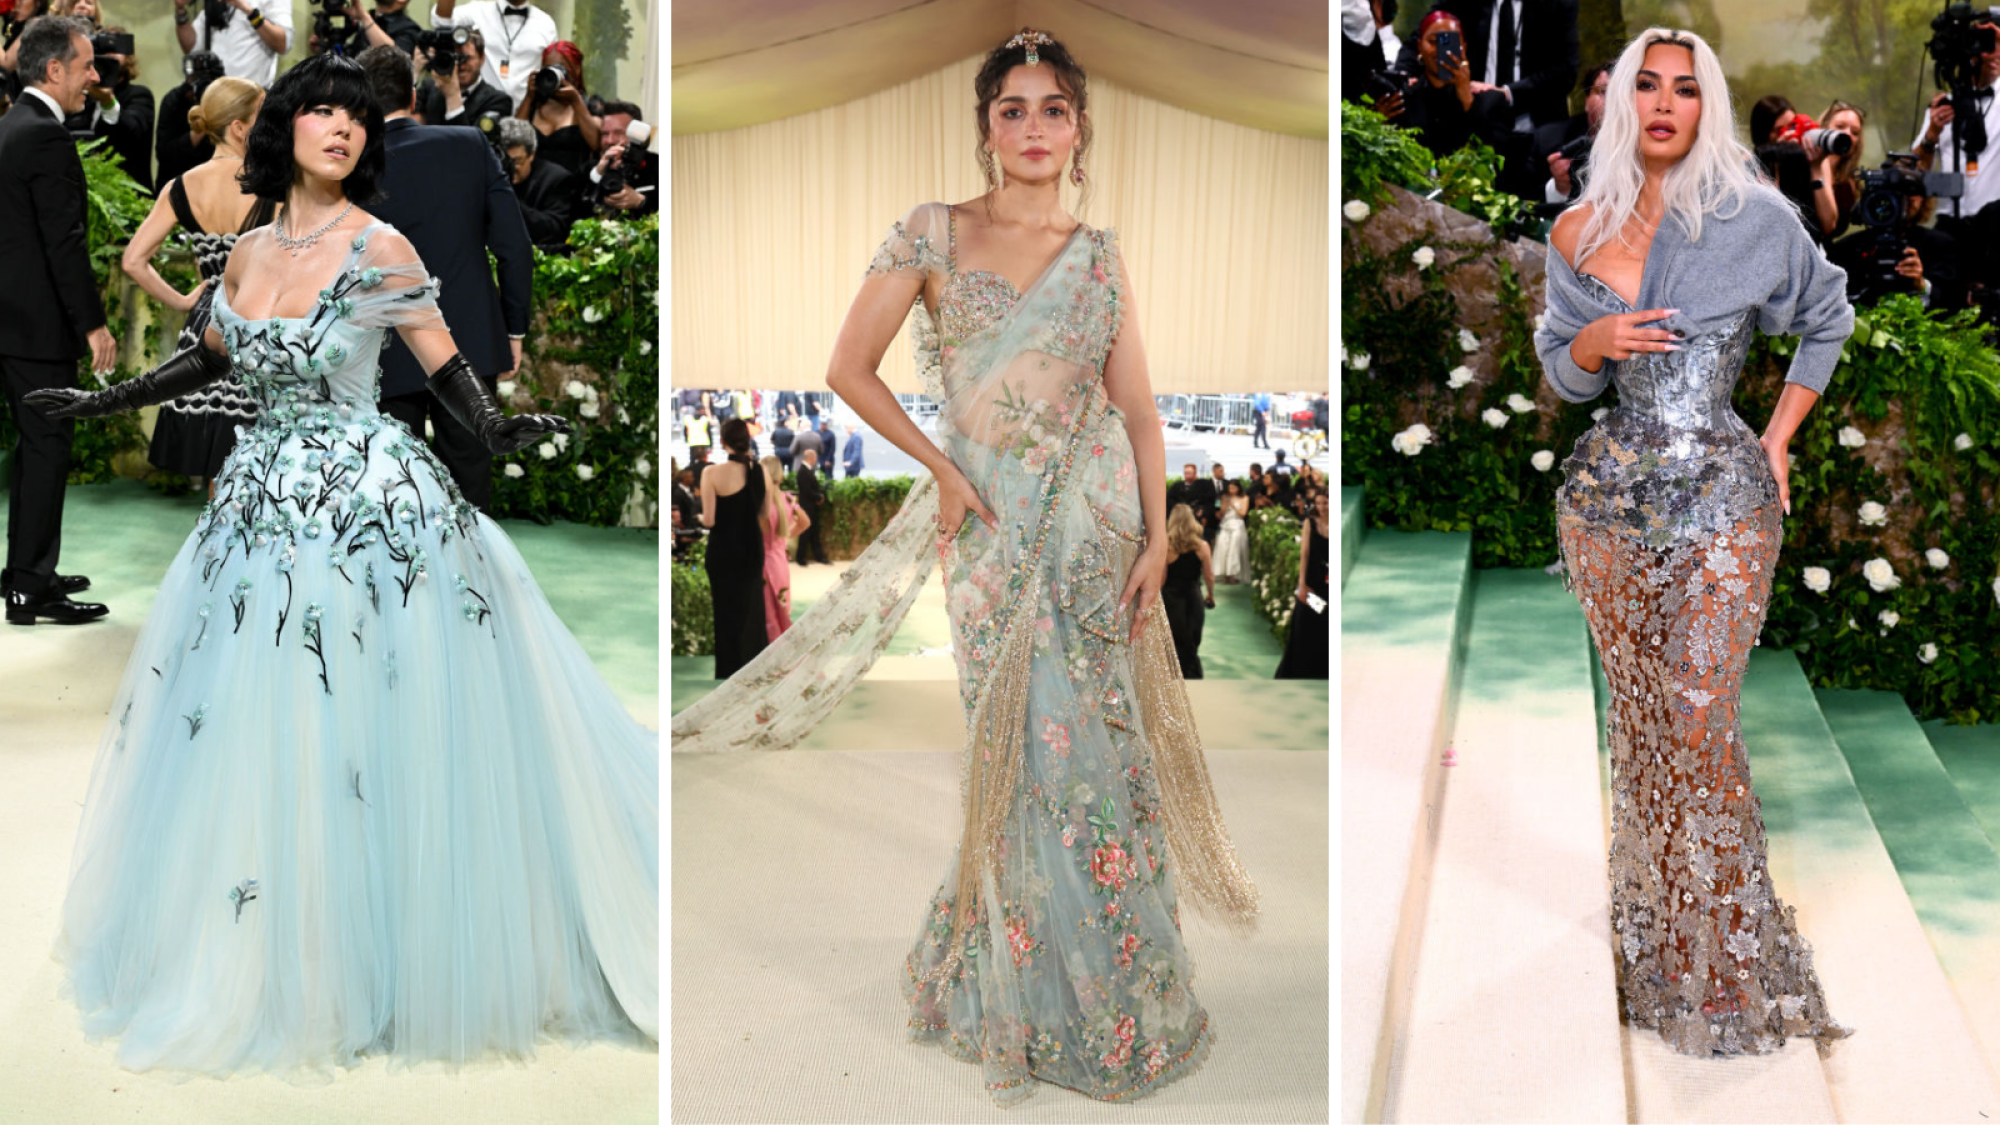 A composite of attendees at the 2024 Met Gala. From left to right: Sydney Sweeney, Alia Bhatt, and Kim Kardashian.